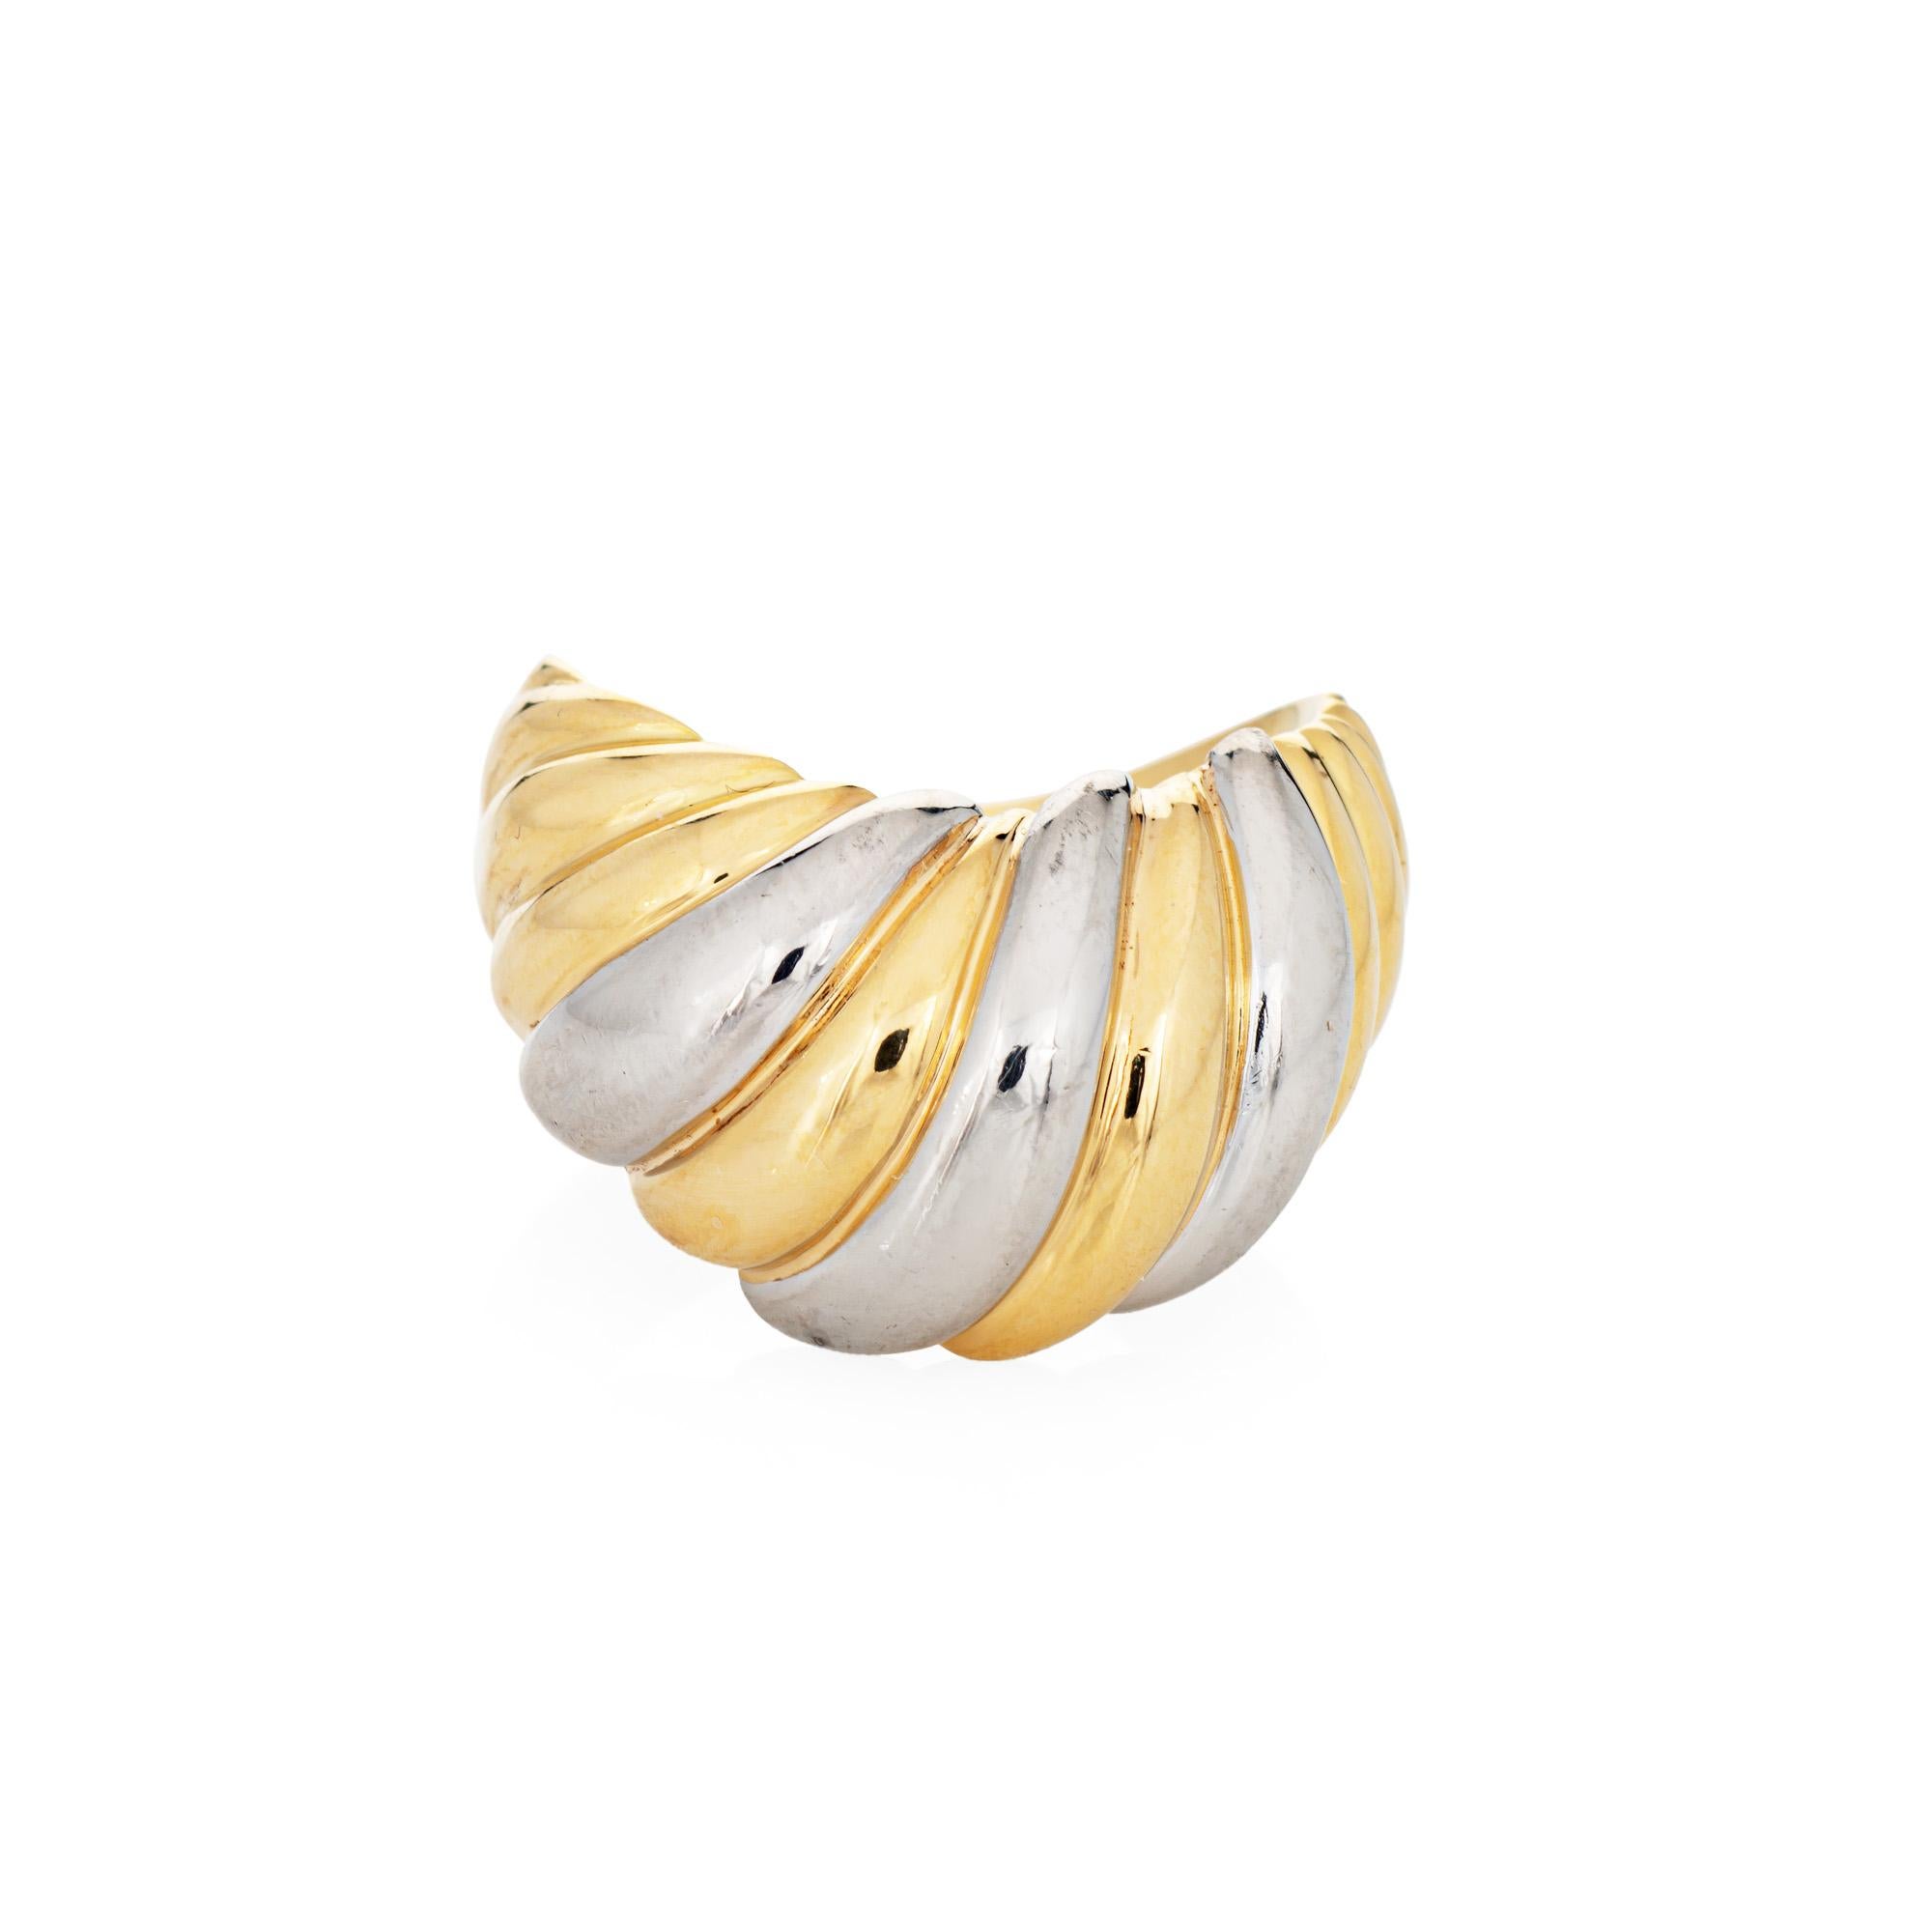 Stylish vintage dome cocktail band, crafted in 18 karat yellow gold and 900 platinum (circa 1990s). 

With an alternating pattern of platinum and yellow gold the band has a low dome rise with a concave design. The ring rises 6mm from the finger